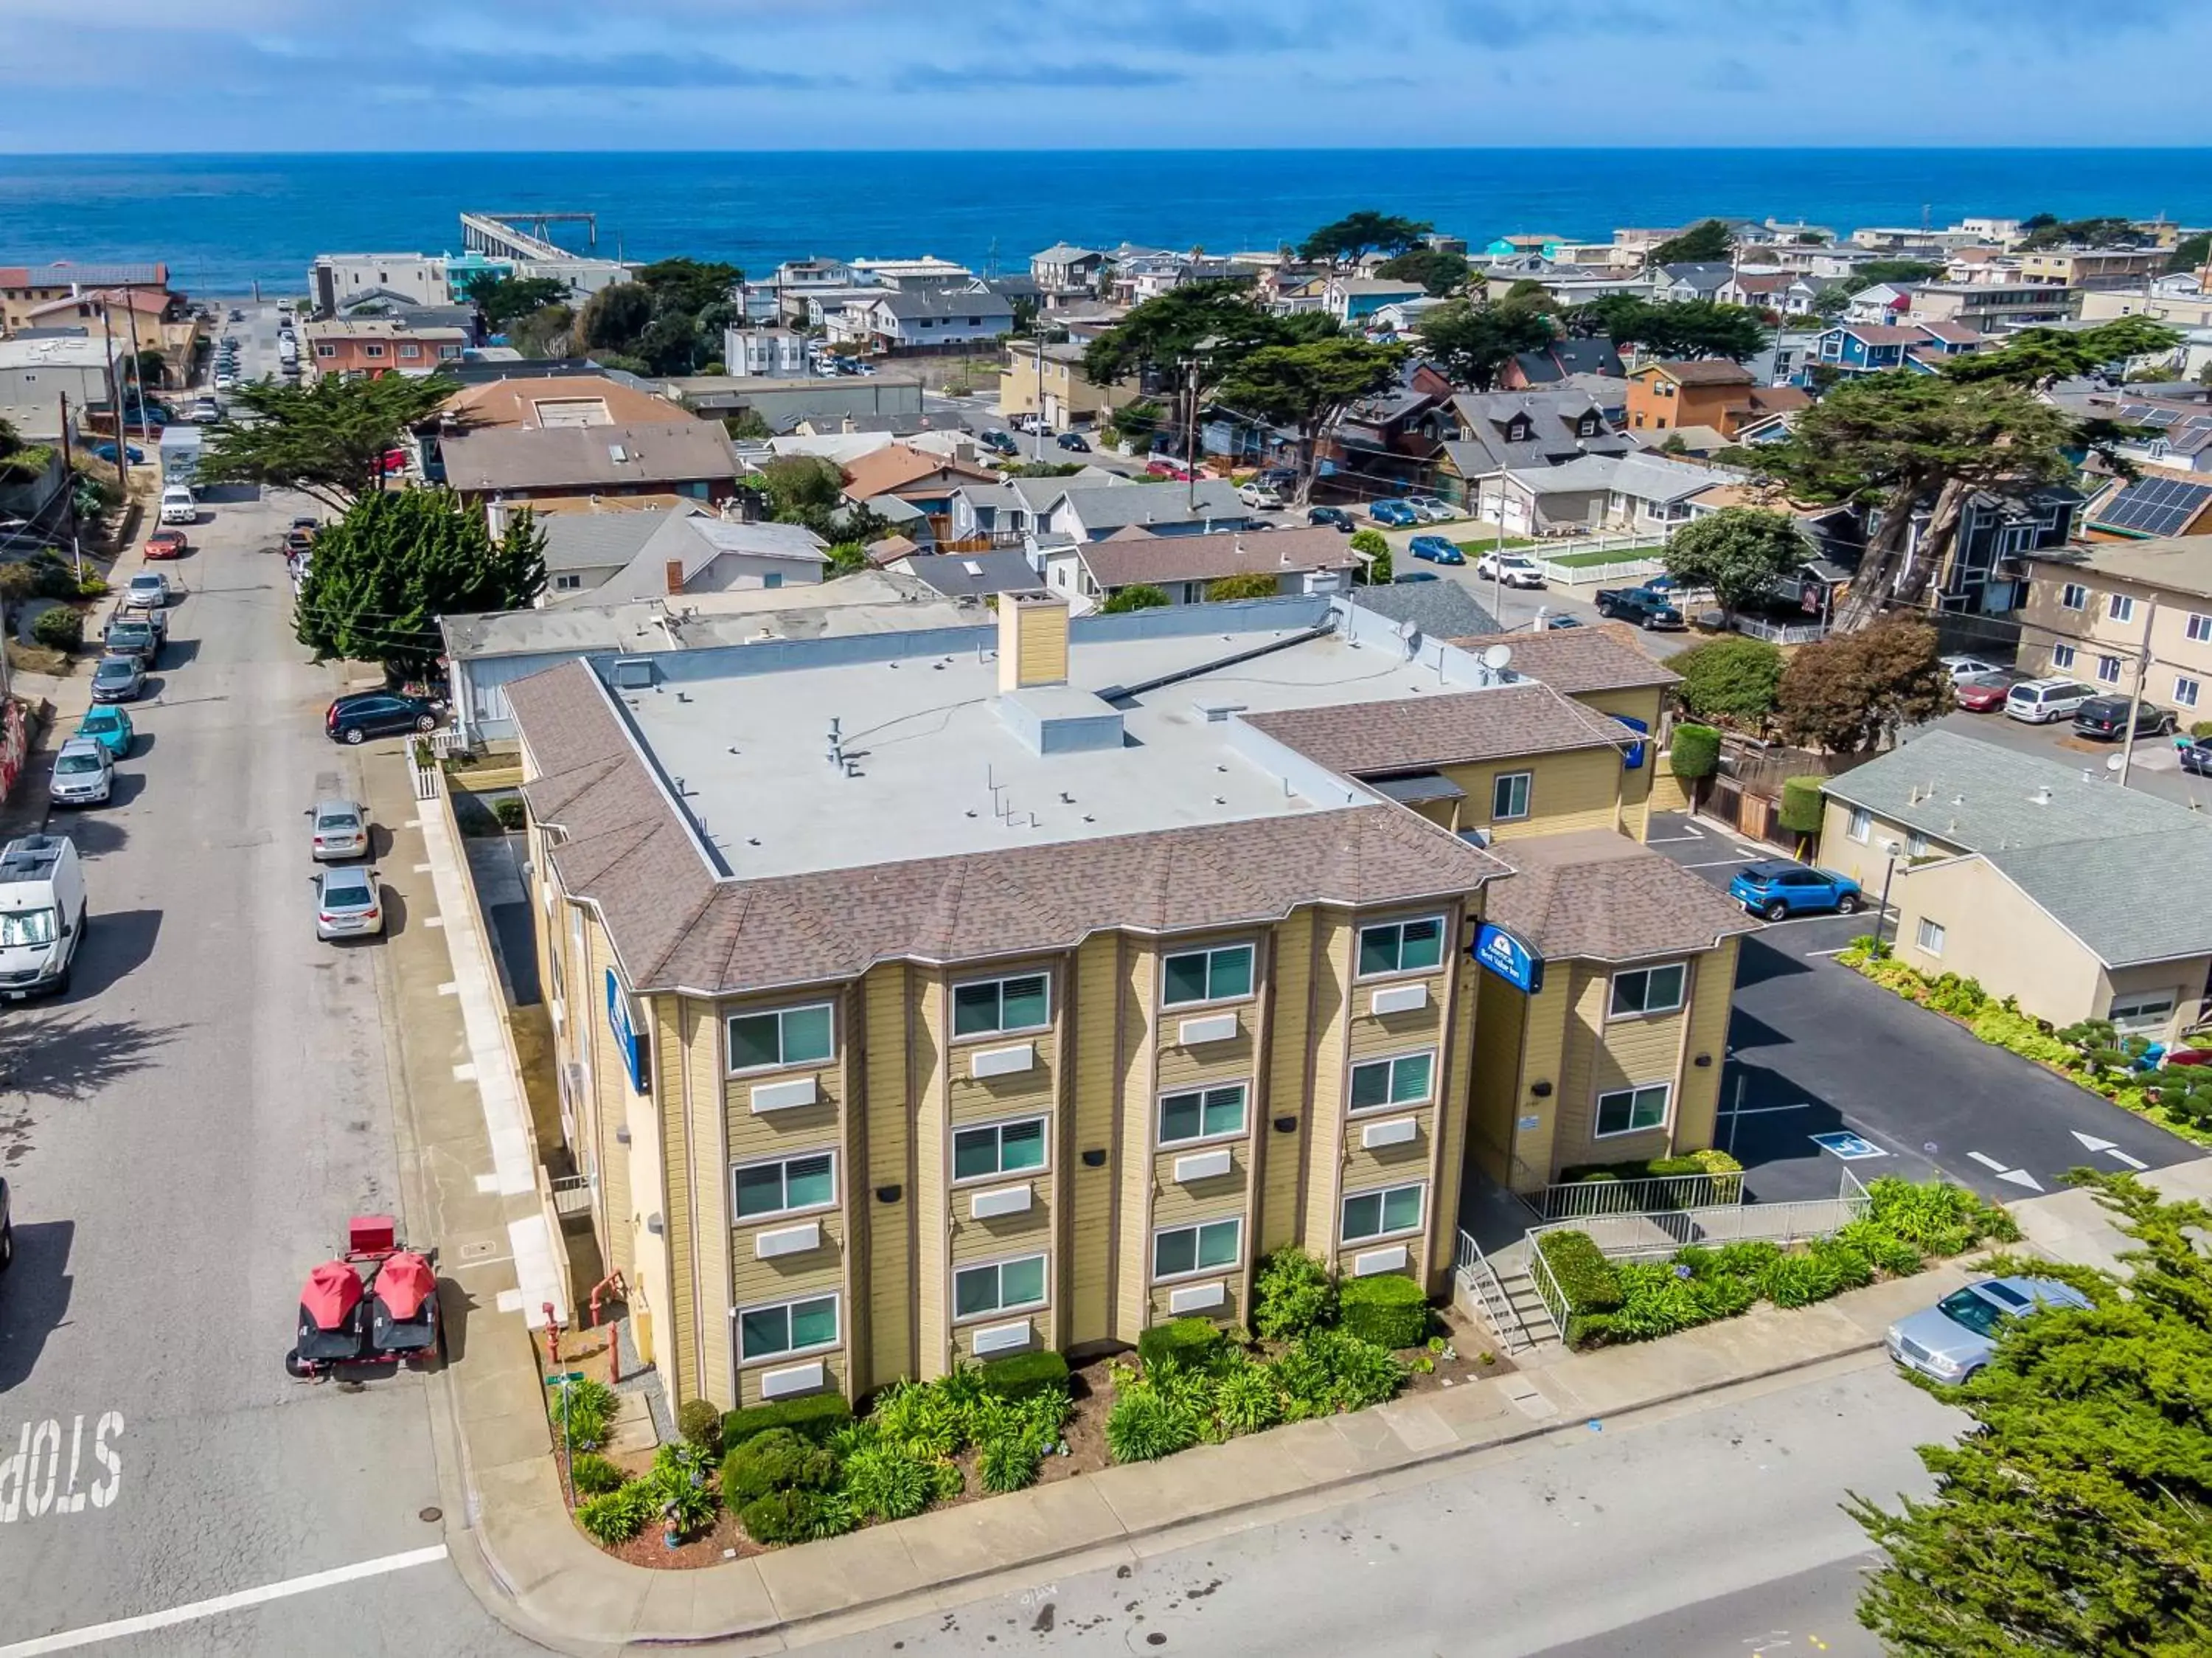 City view in Americas Best Value Inn San Francisco/Pacifica